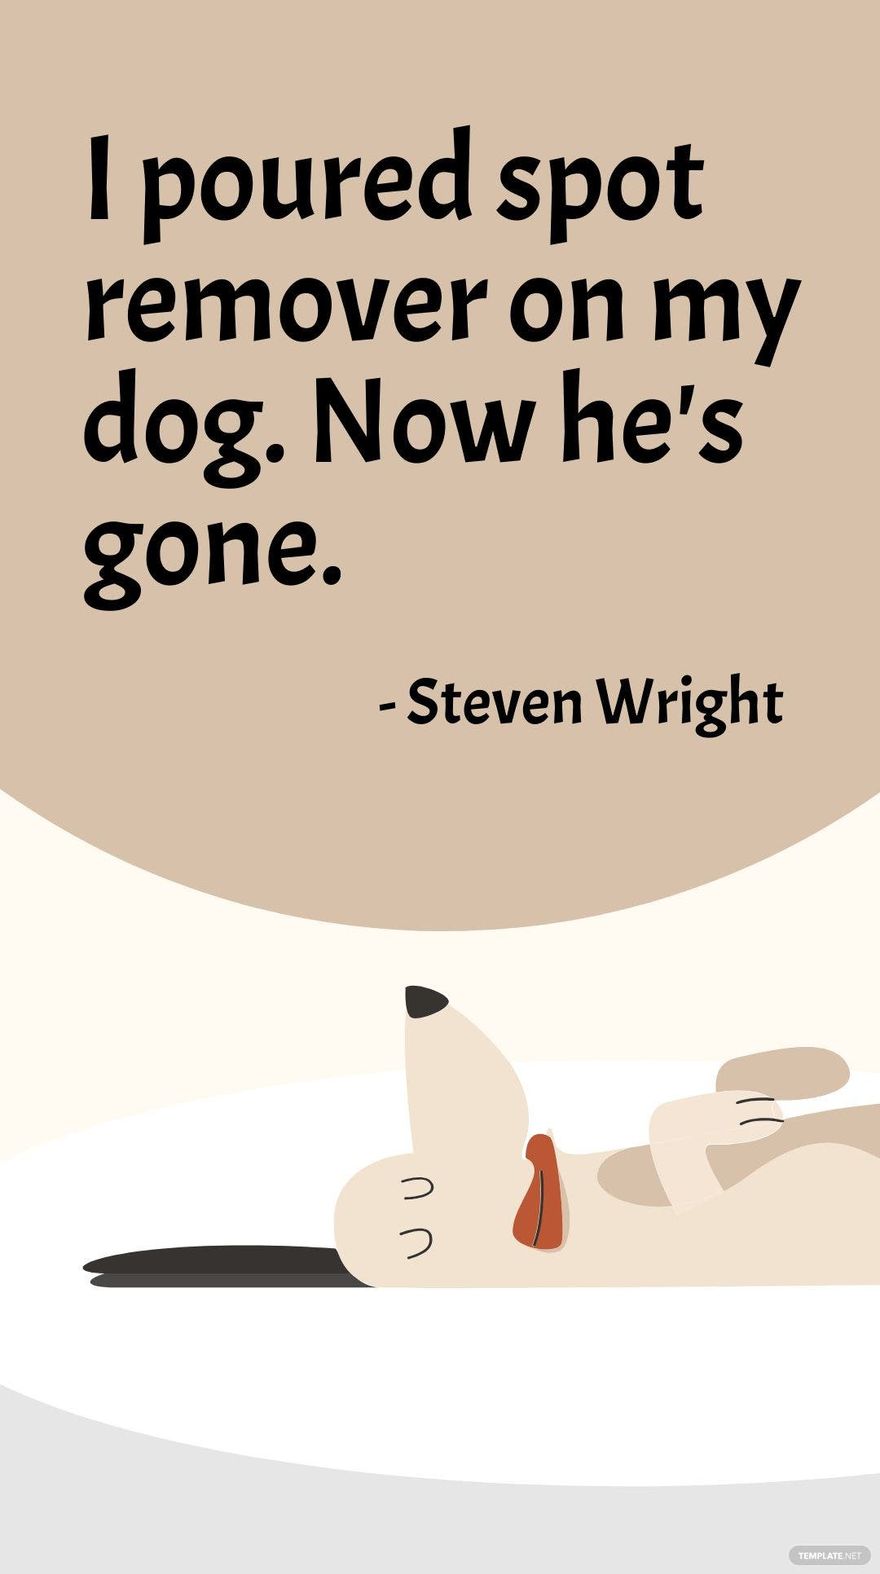 Free Steven Wright - I poured spot remover on my dog. Now he's gone. in JPG